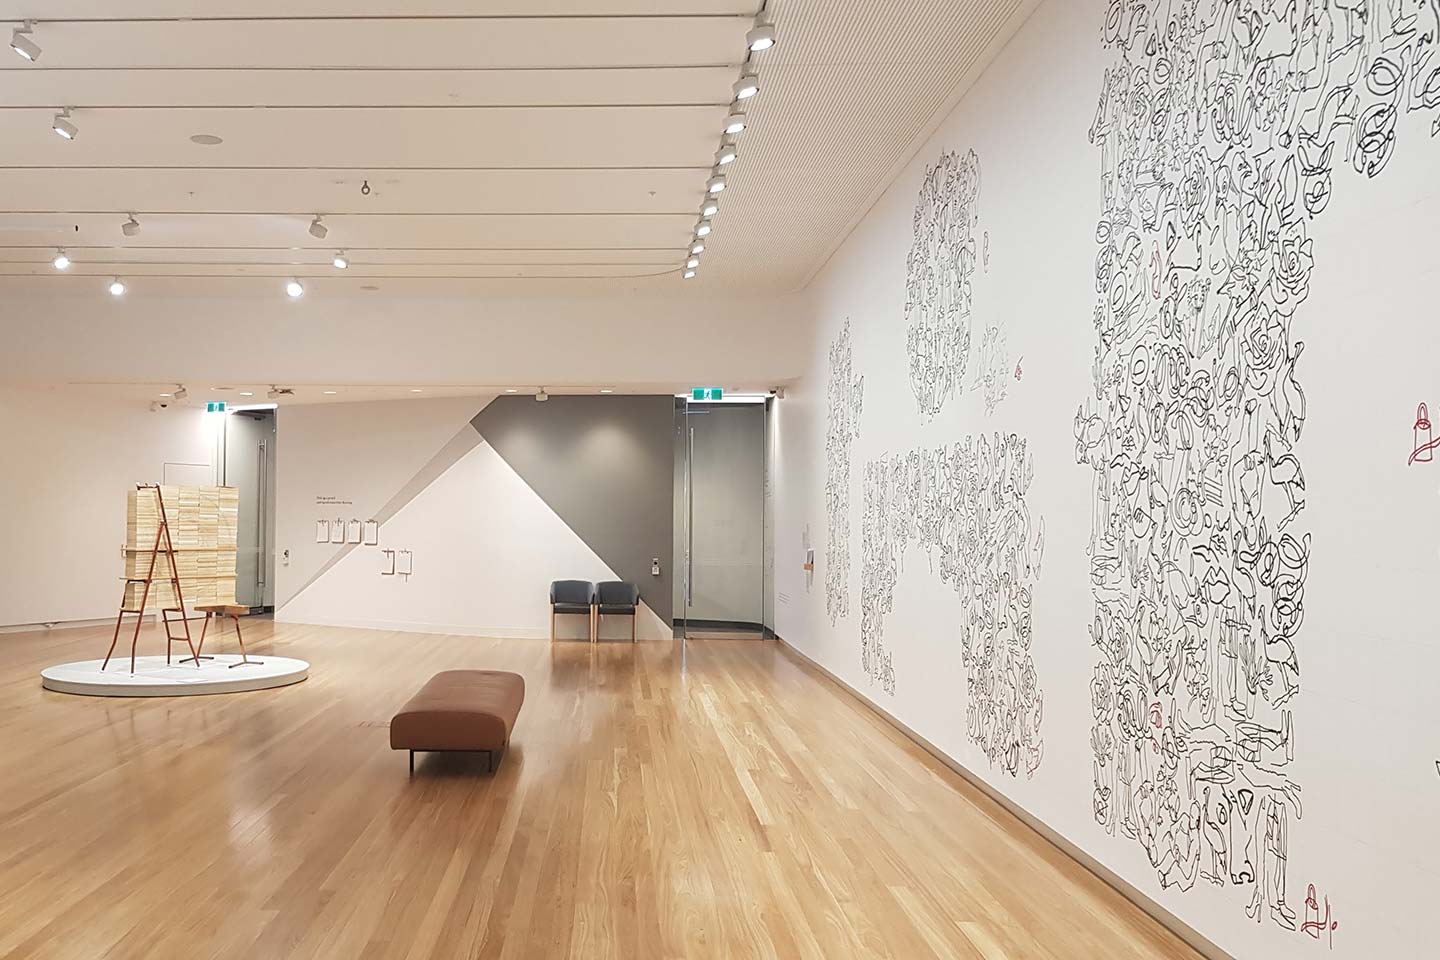 The exhibition space at Bunjil Place in City of Casey with an interactive puzzle drawn on the wall and a sculpture in the middle of the room.